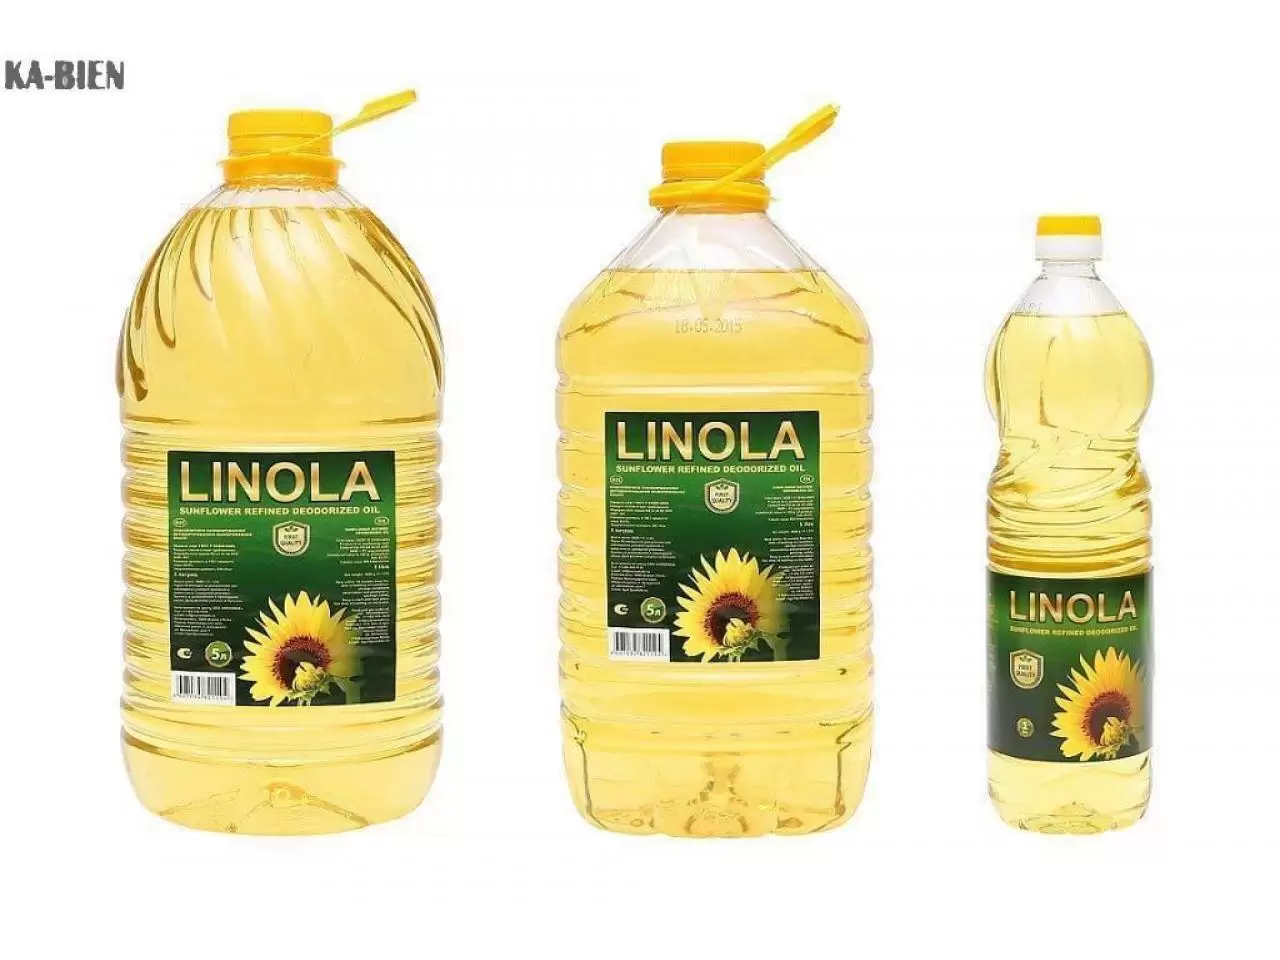 Refined Sunflower Oil Wholesale Suppliers Email:globaltradingd@gmail.com - 2/4